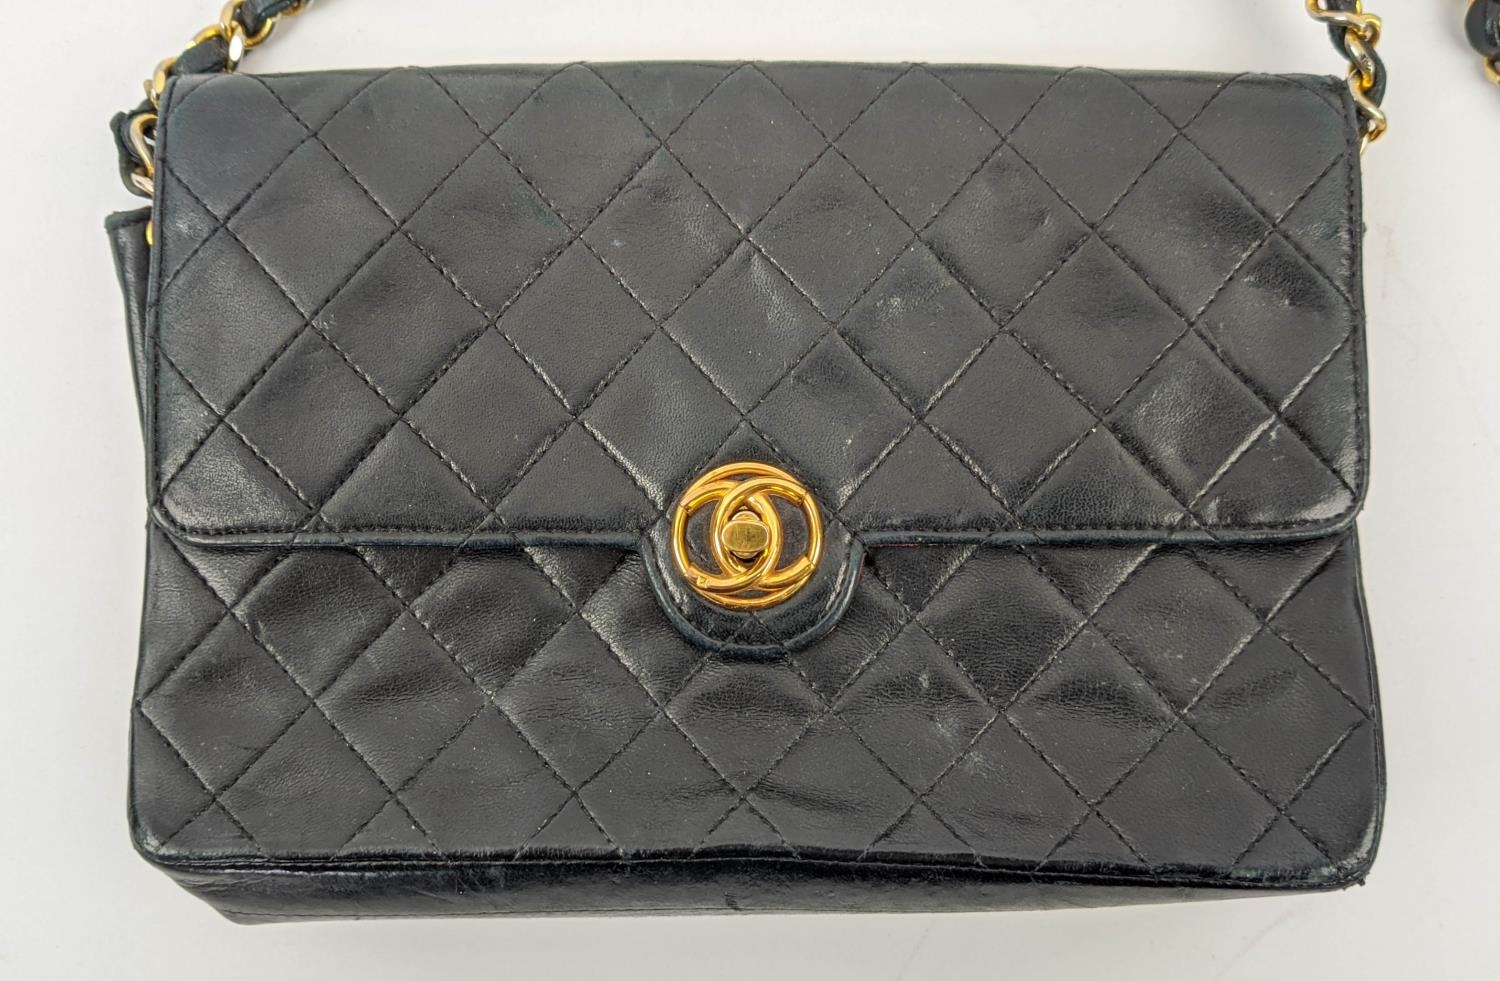 VINTAGE CHANEL FLAP BAG, round turn-lock, iconic burgundy leather lining, quilted front and back - Image 4 of 13